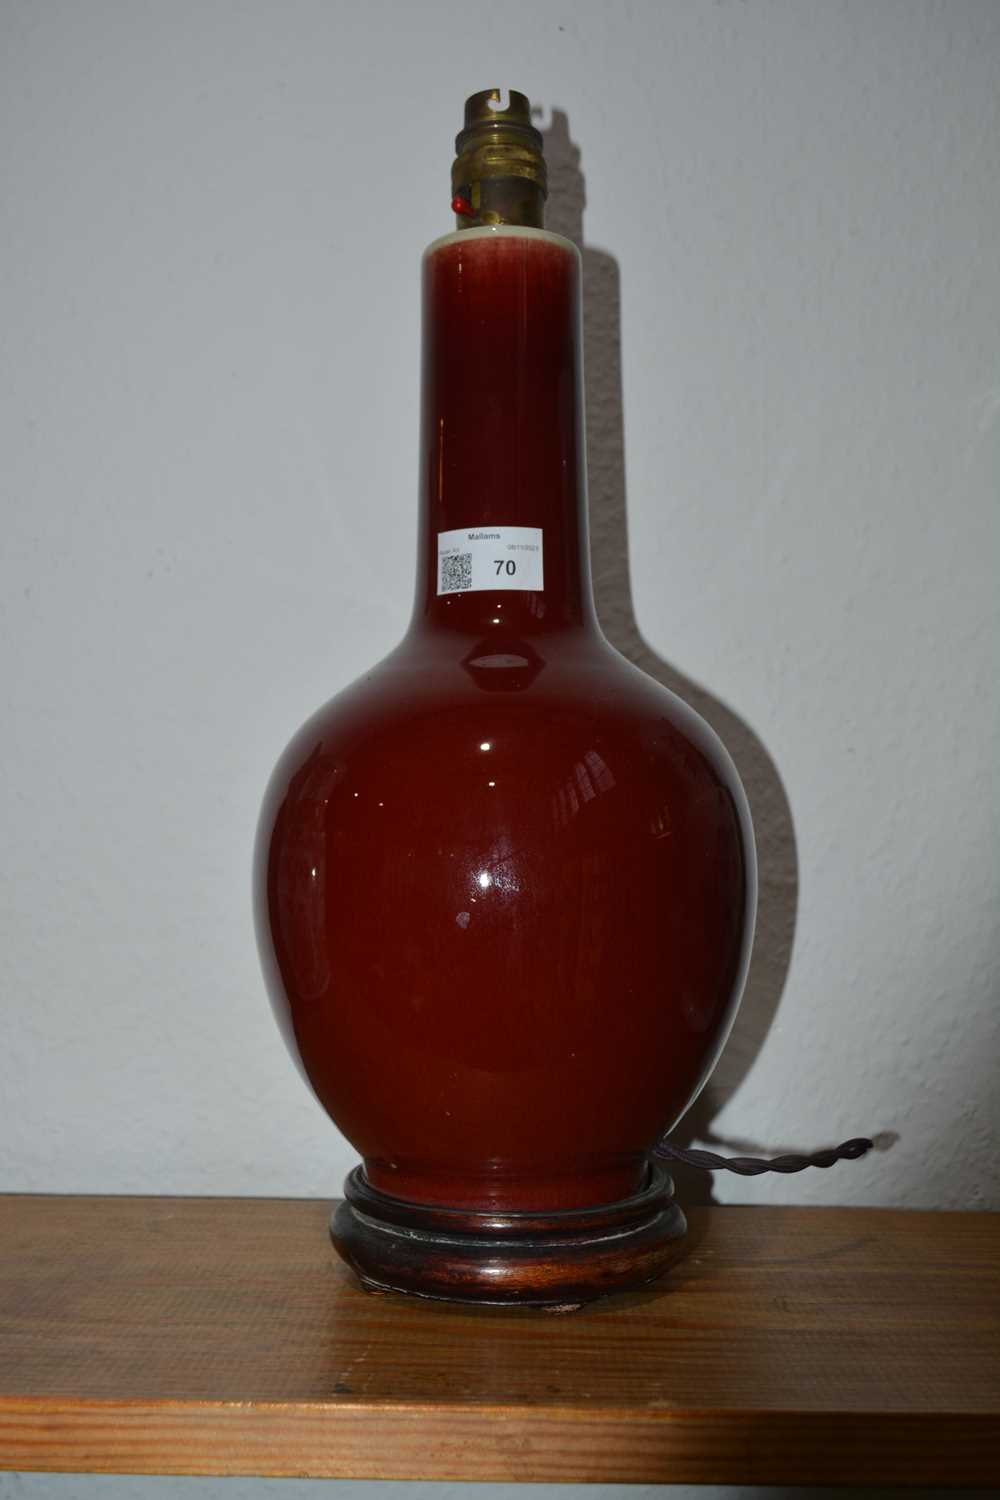 Sang de boeuf bottle vase Chinese, 18th/19th Century converted to a table lamp, and with a - Image 3 of 4